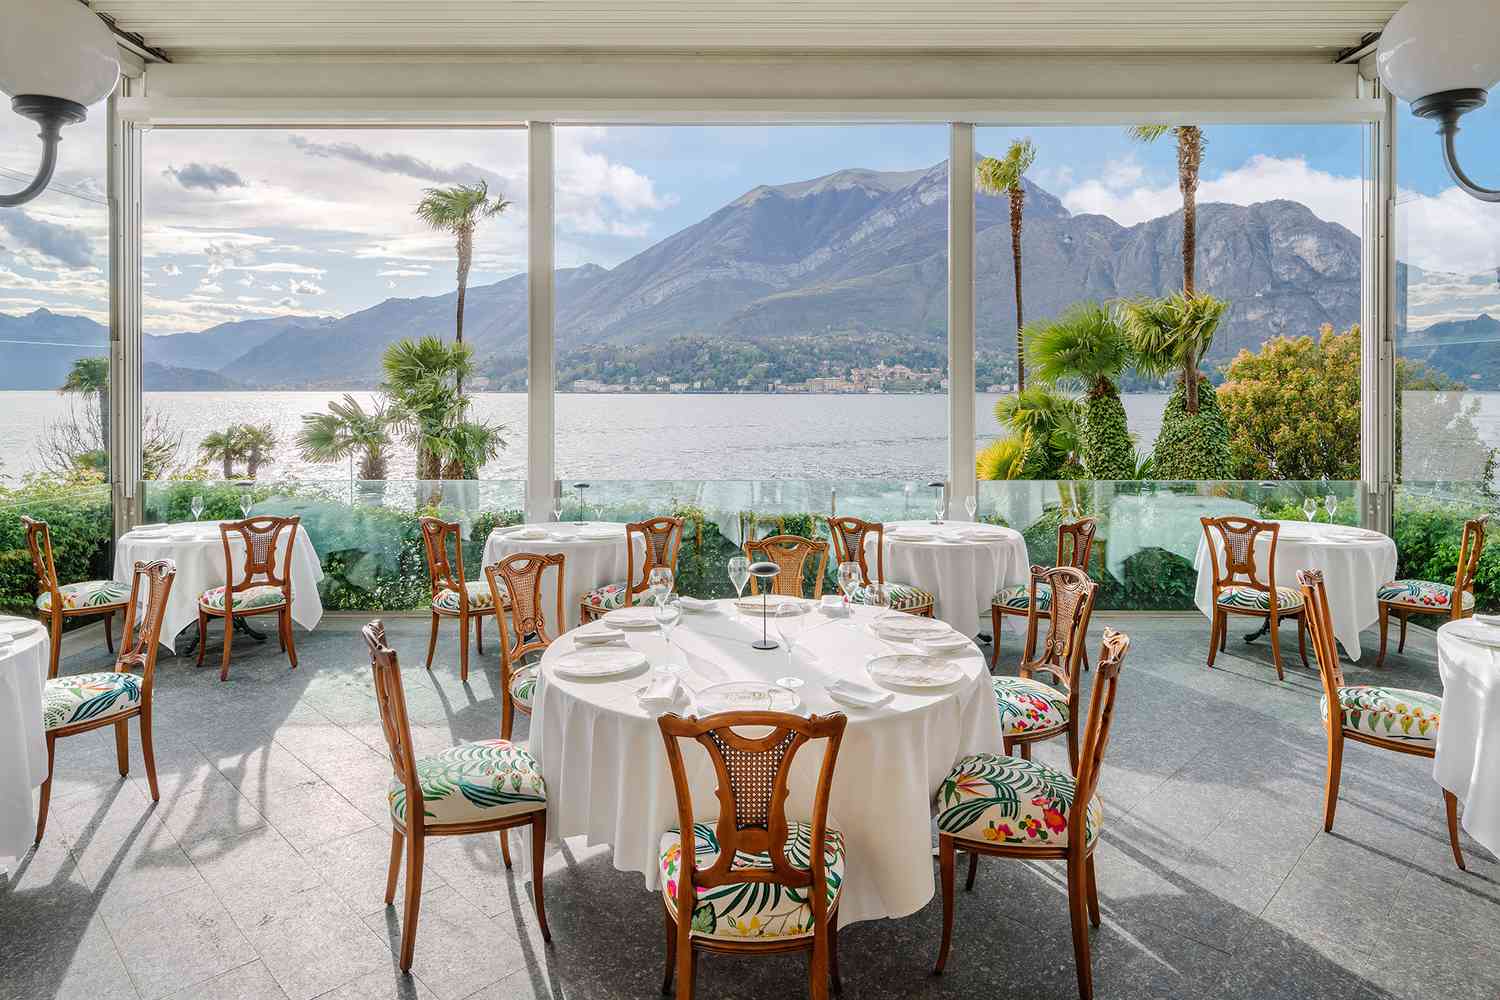 Dining with view of mountains and water at Grand Hotel Villa Serbelloni